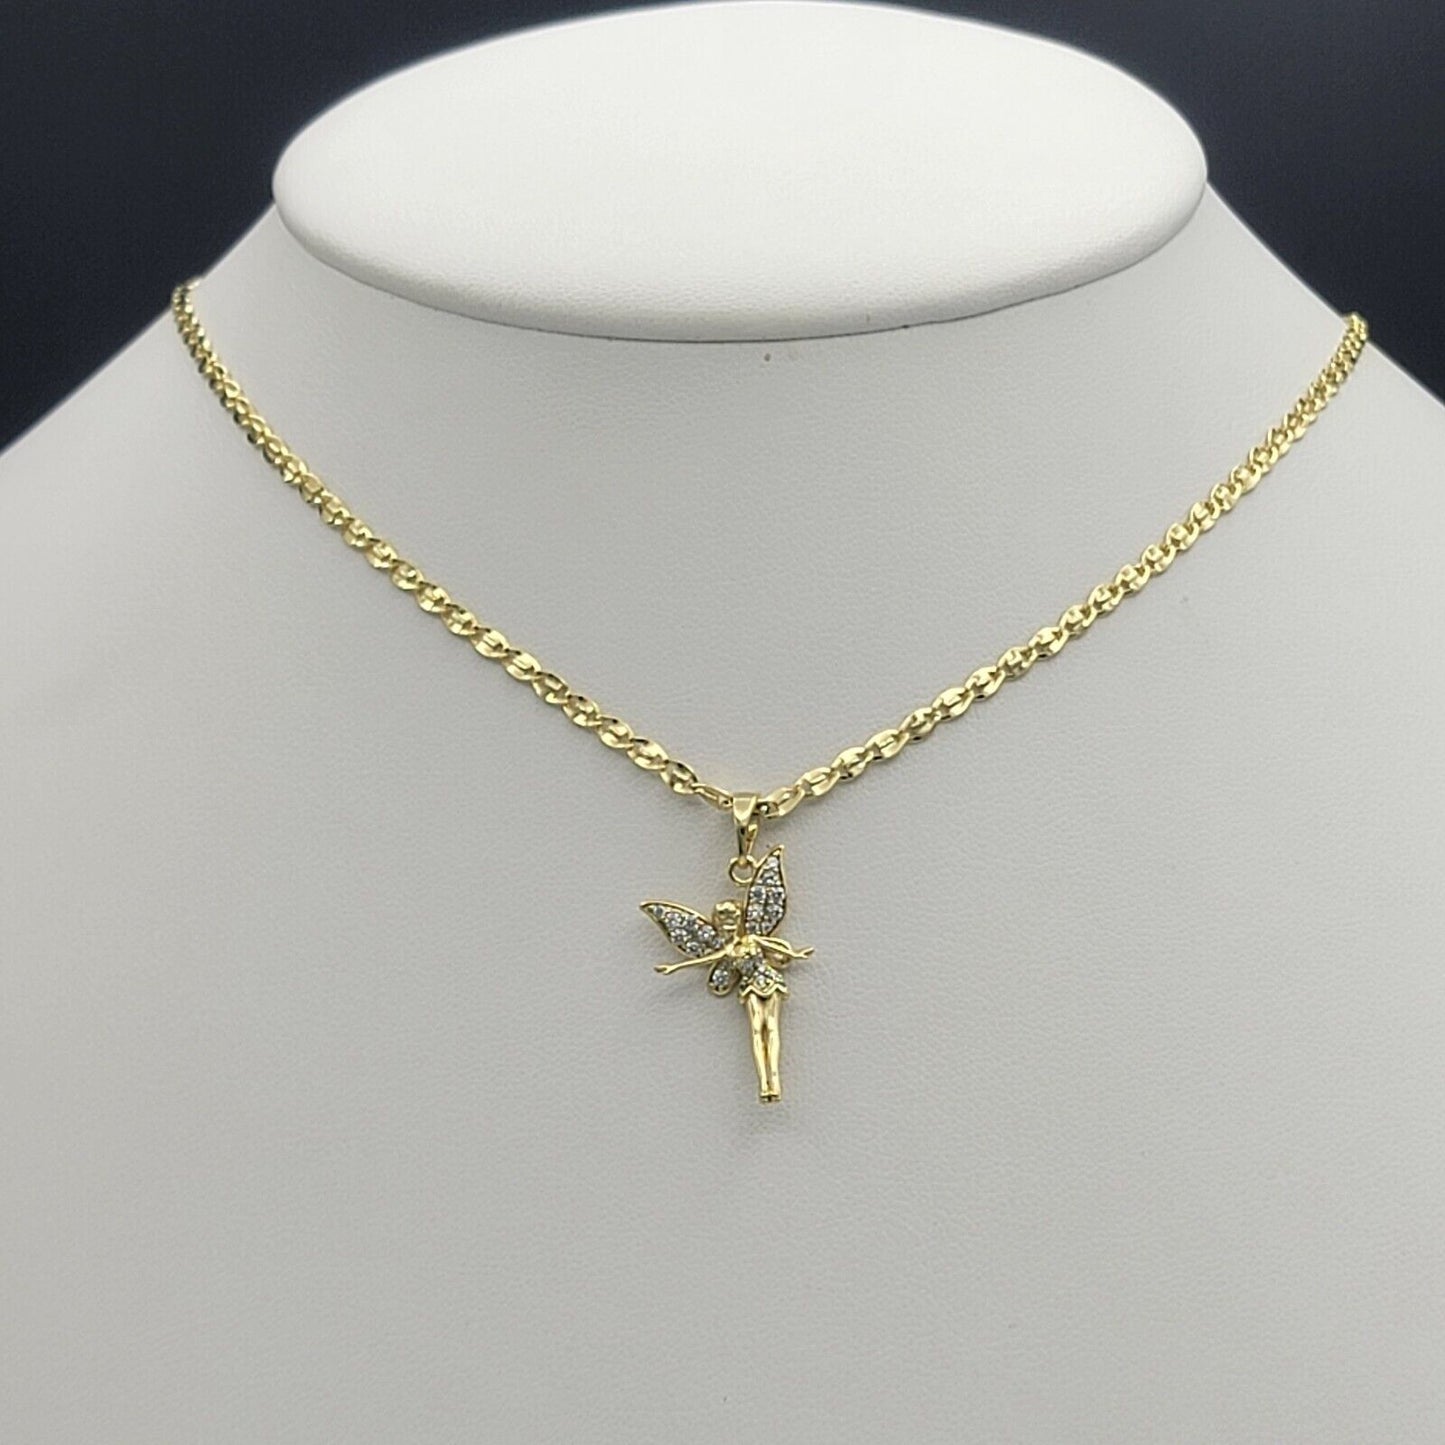 Necklaces - 14K Gold Plated. Angel Fairy Tale Wings CZ Crystal Pendant & Chain.